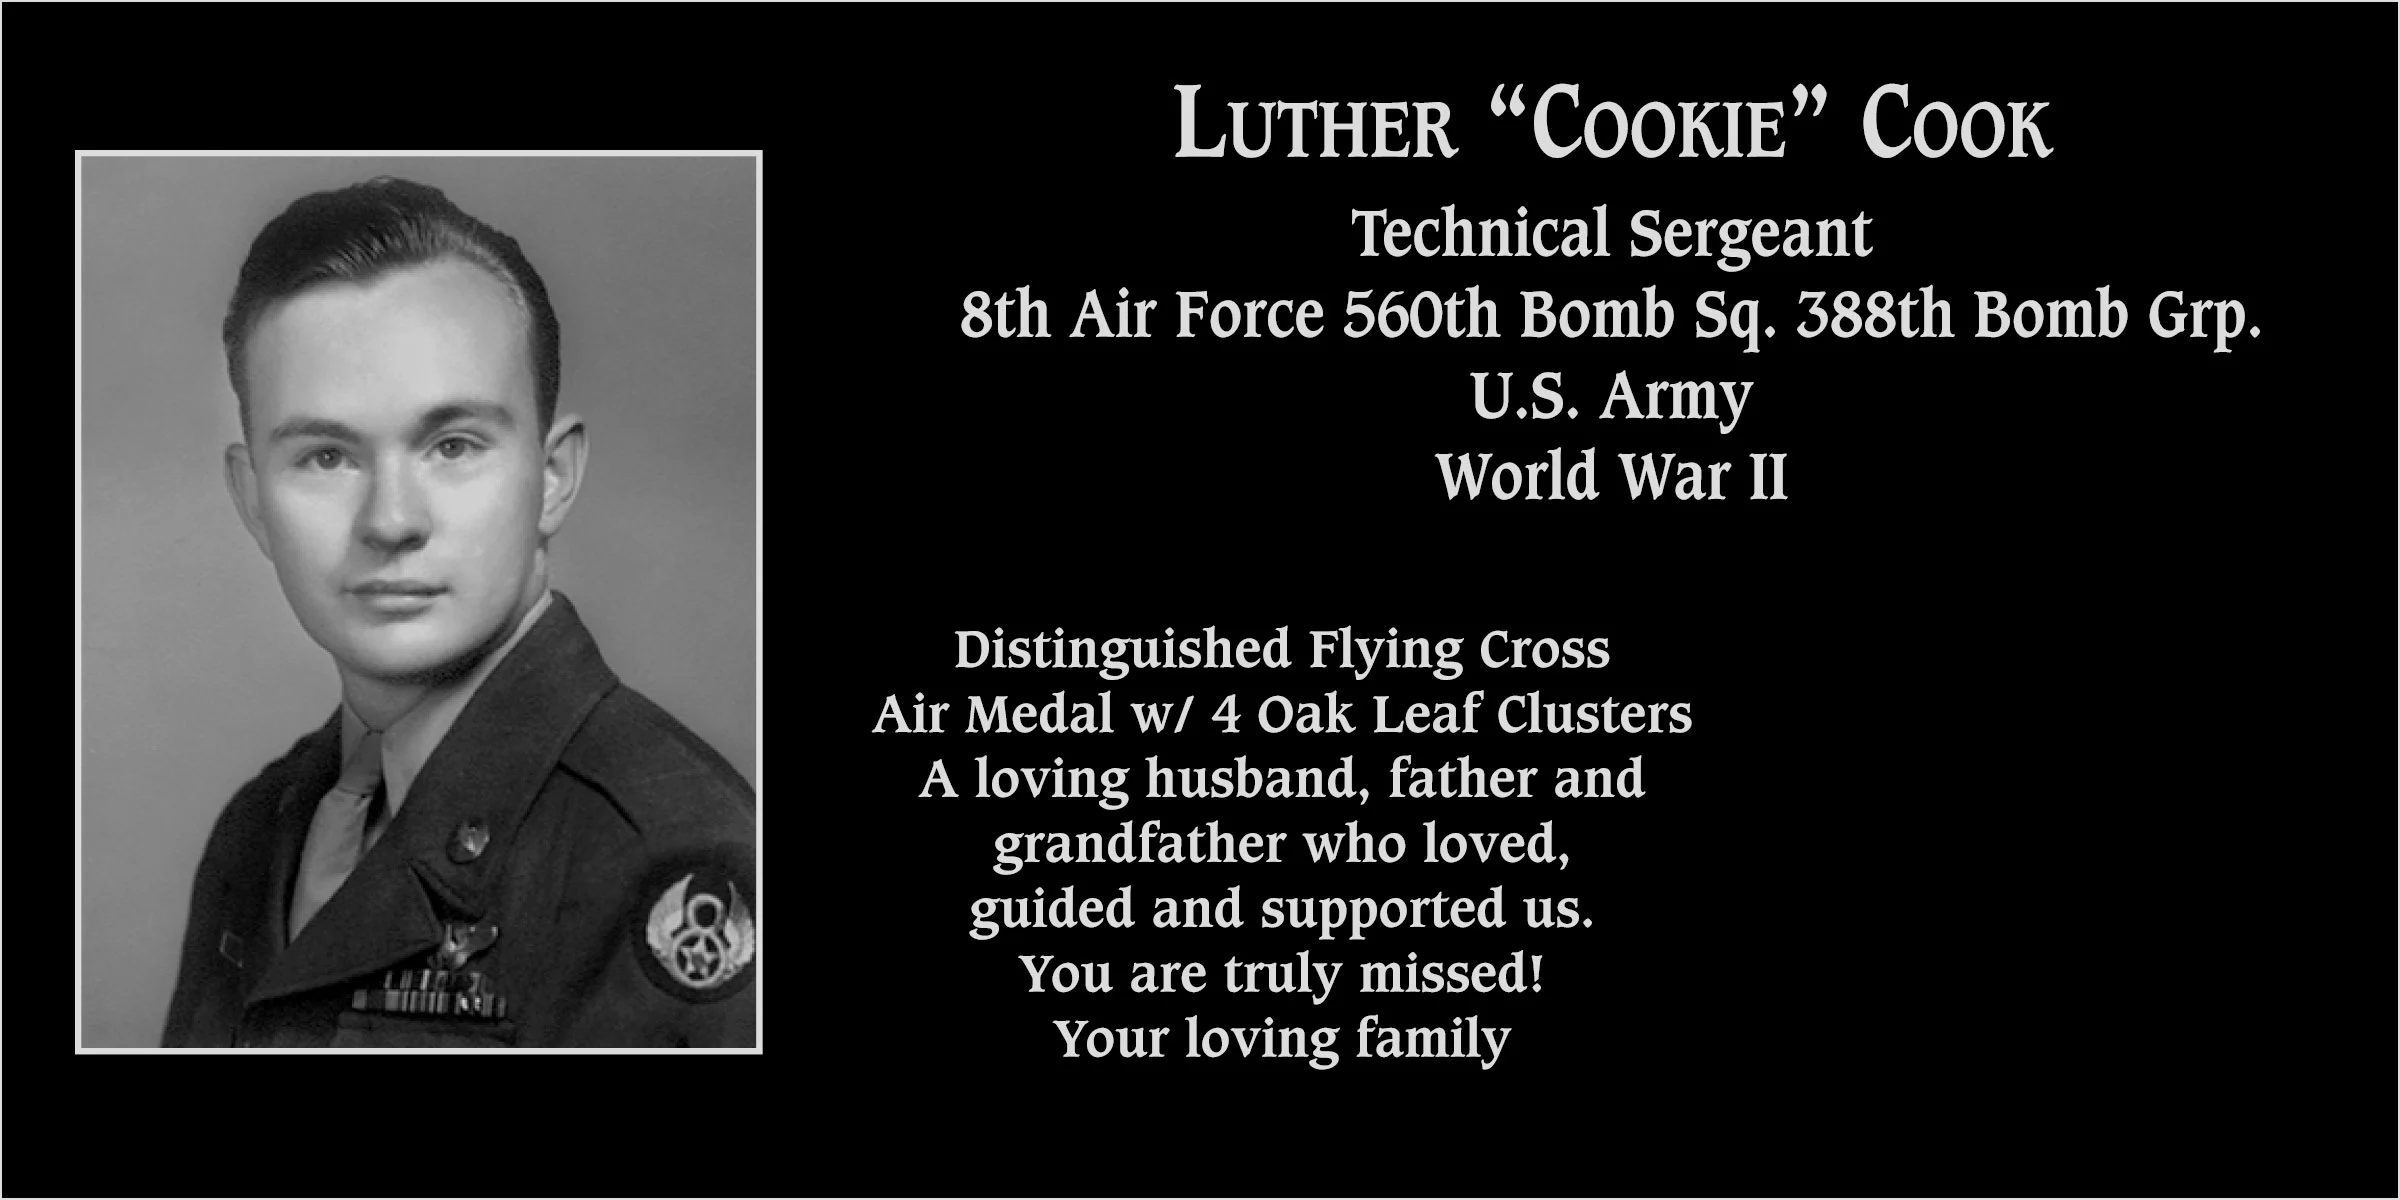 Luther “Cookie” Cook